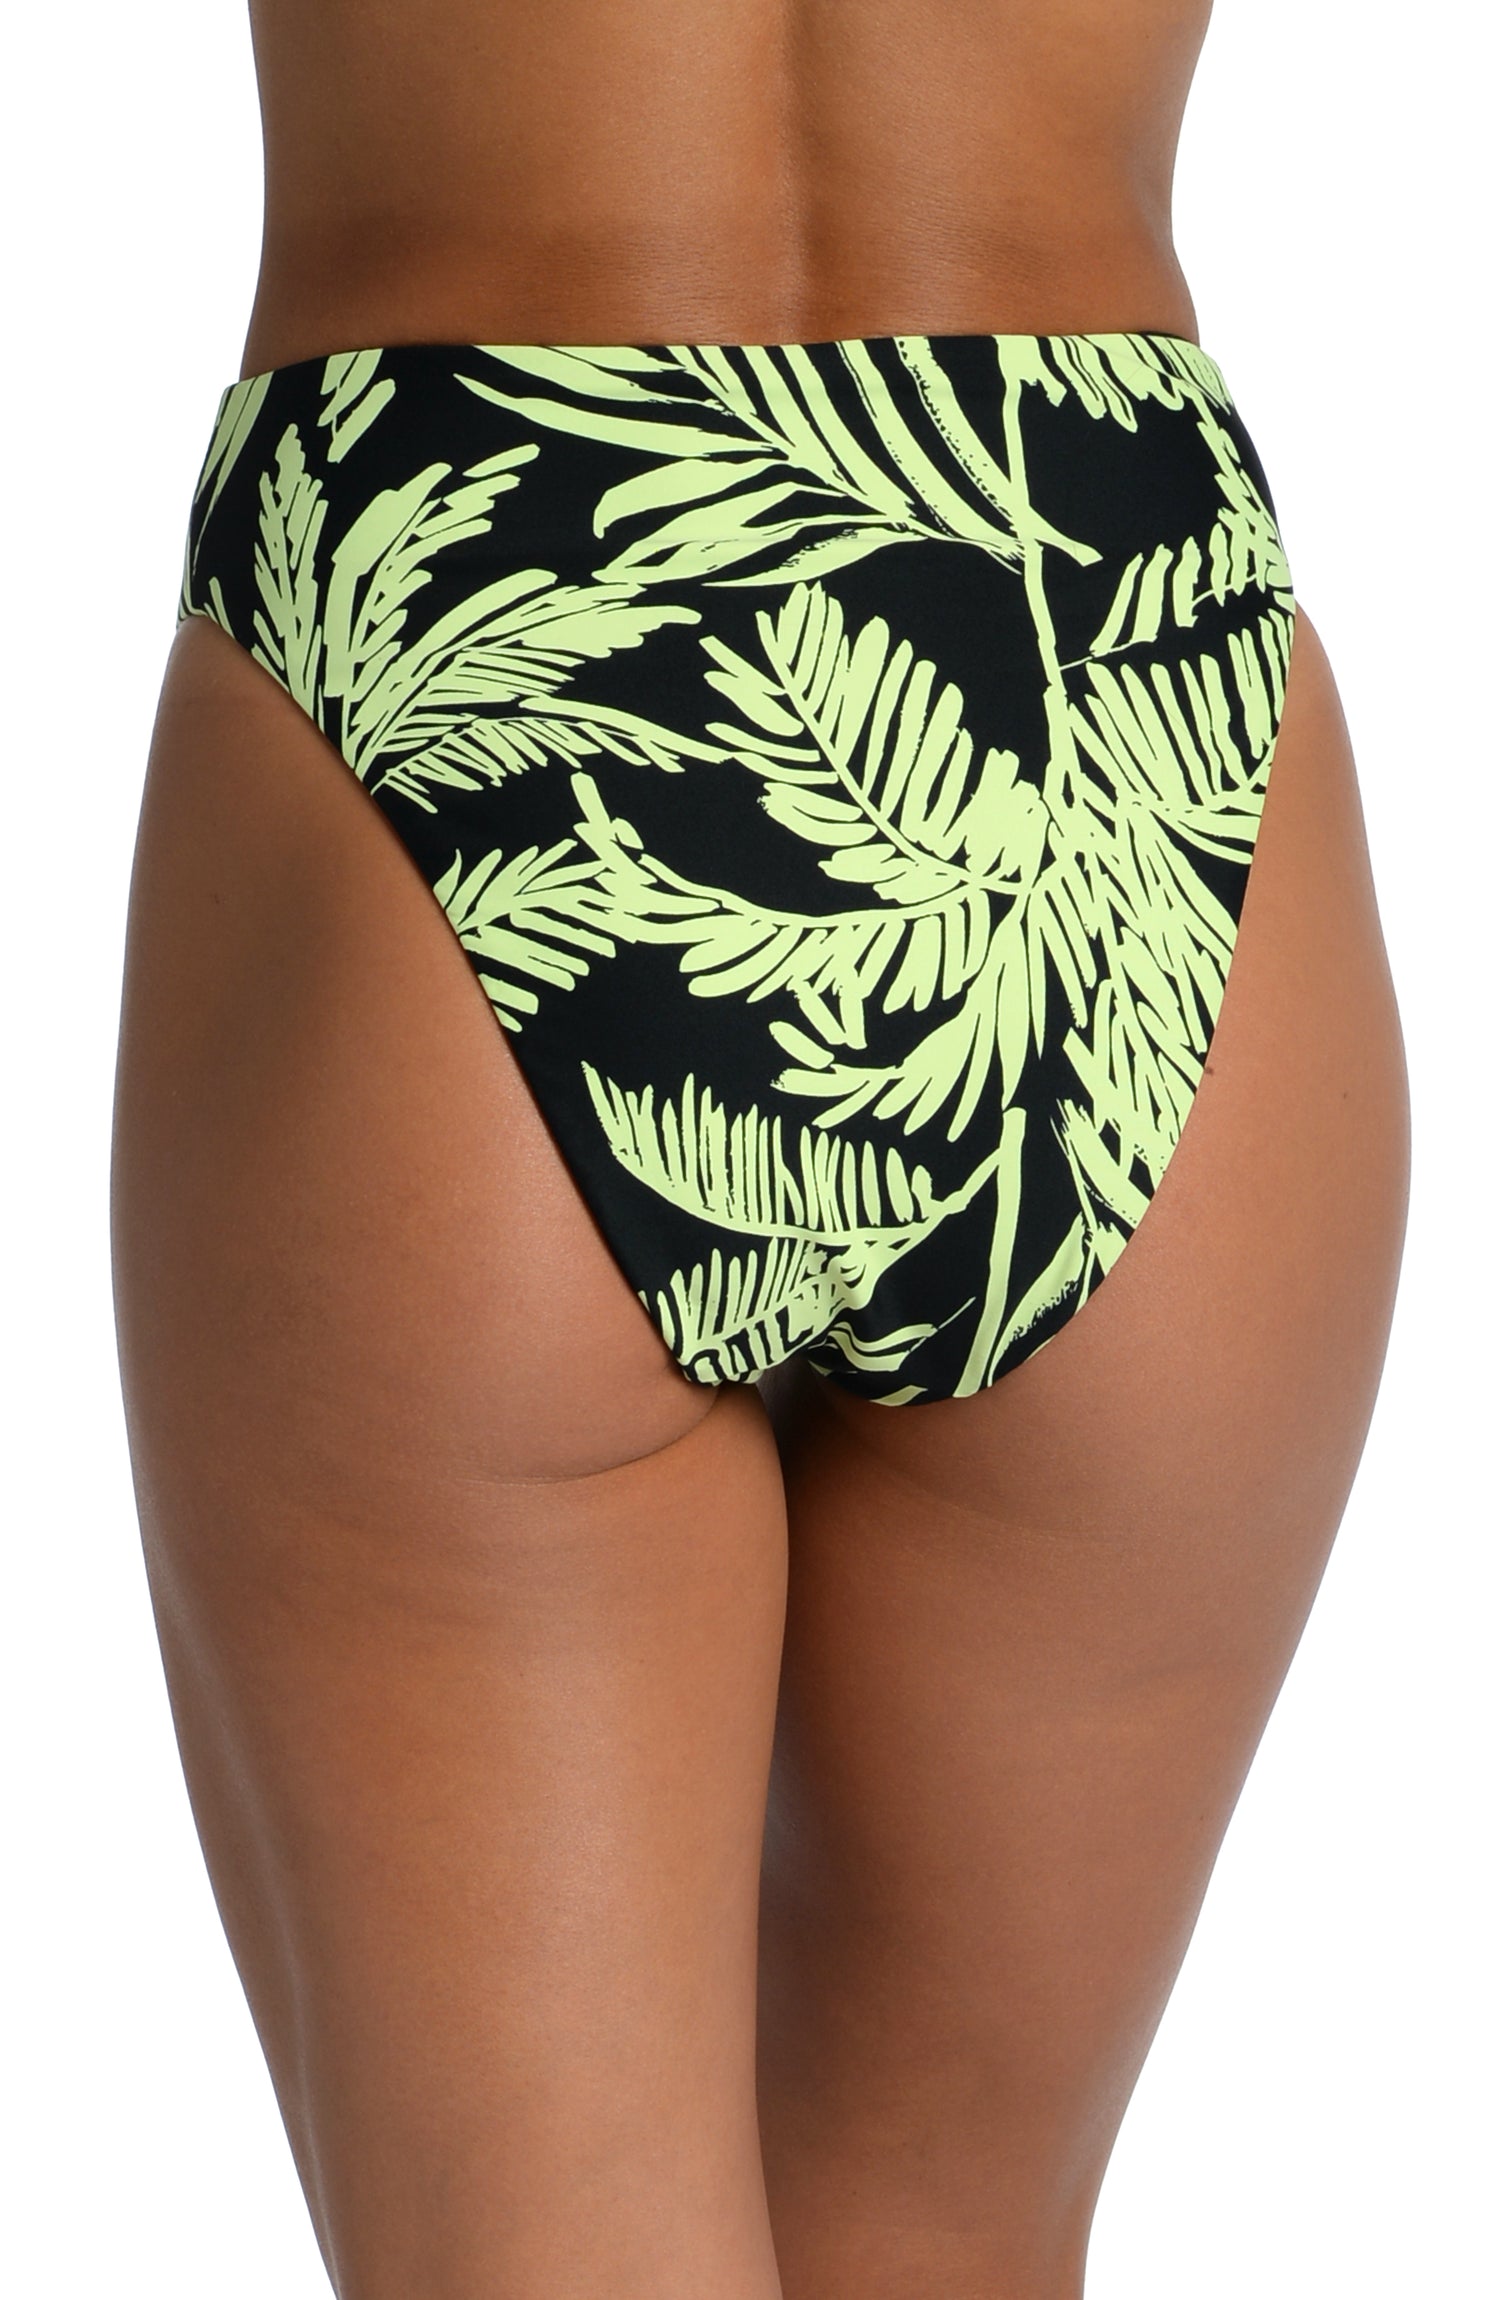 Model is wearing a green and black colored tropical printed high waist bottom from our Abstract Palm collection!